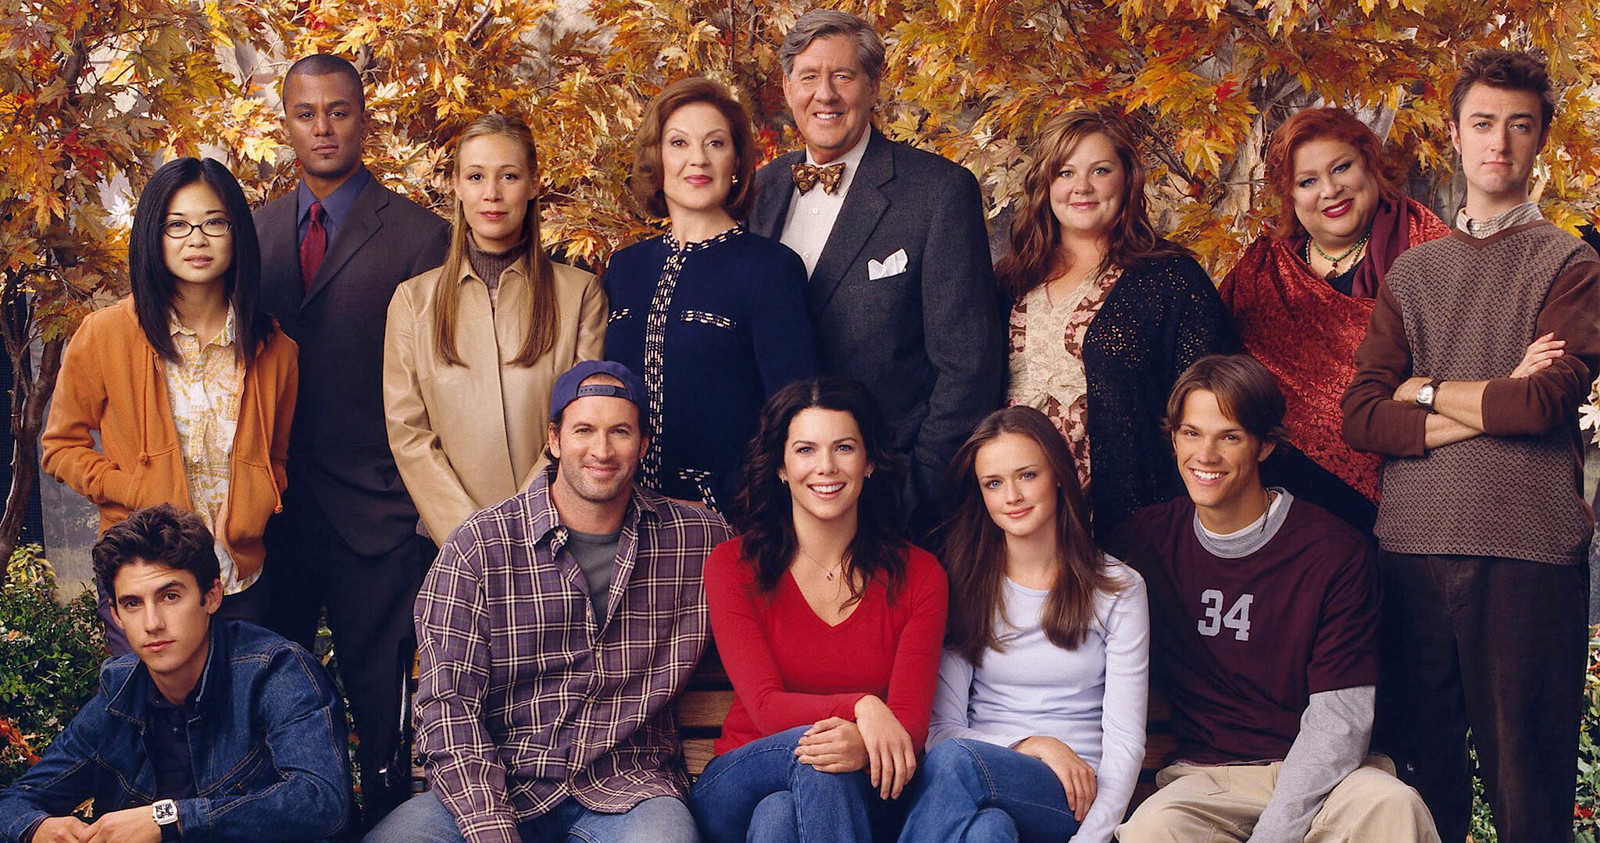 The cast of Gilmore Girls